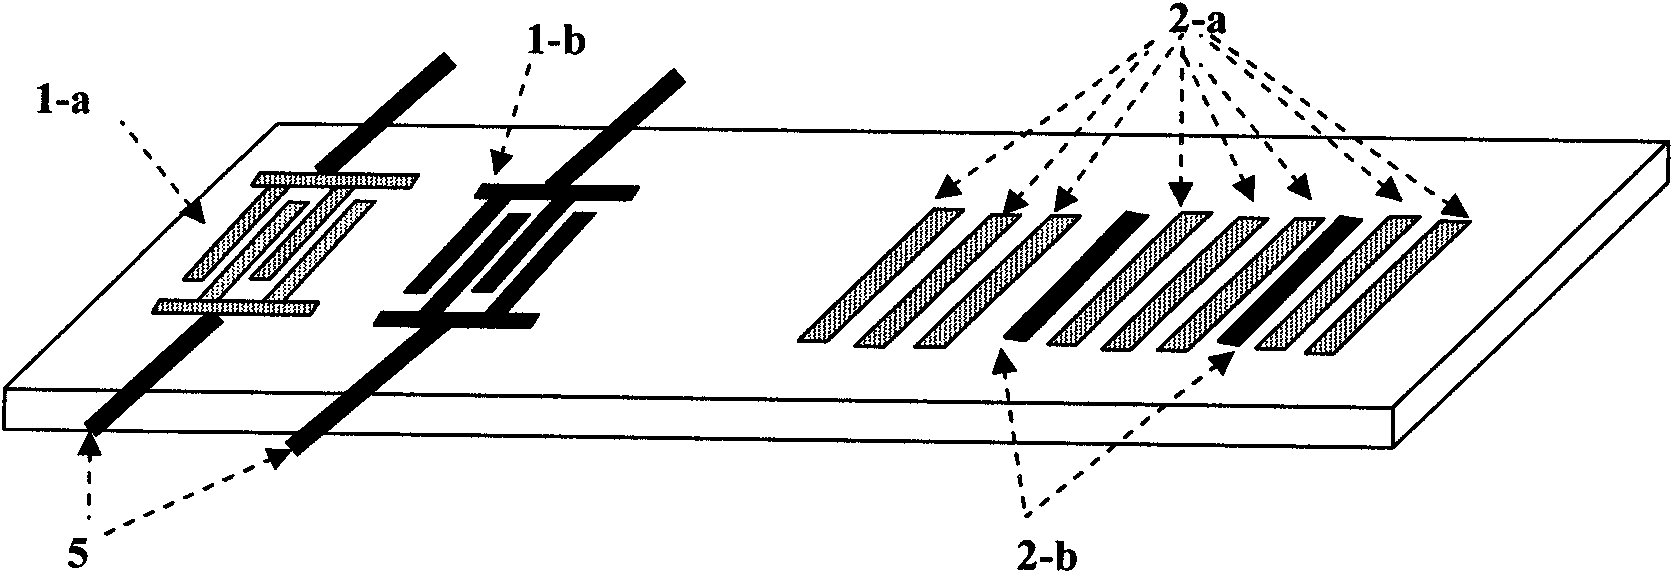 Surface acoustic wave radio frequency electronic tag with large data capacity